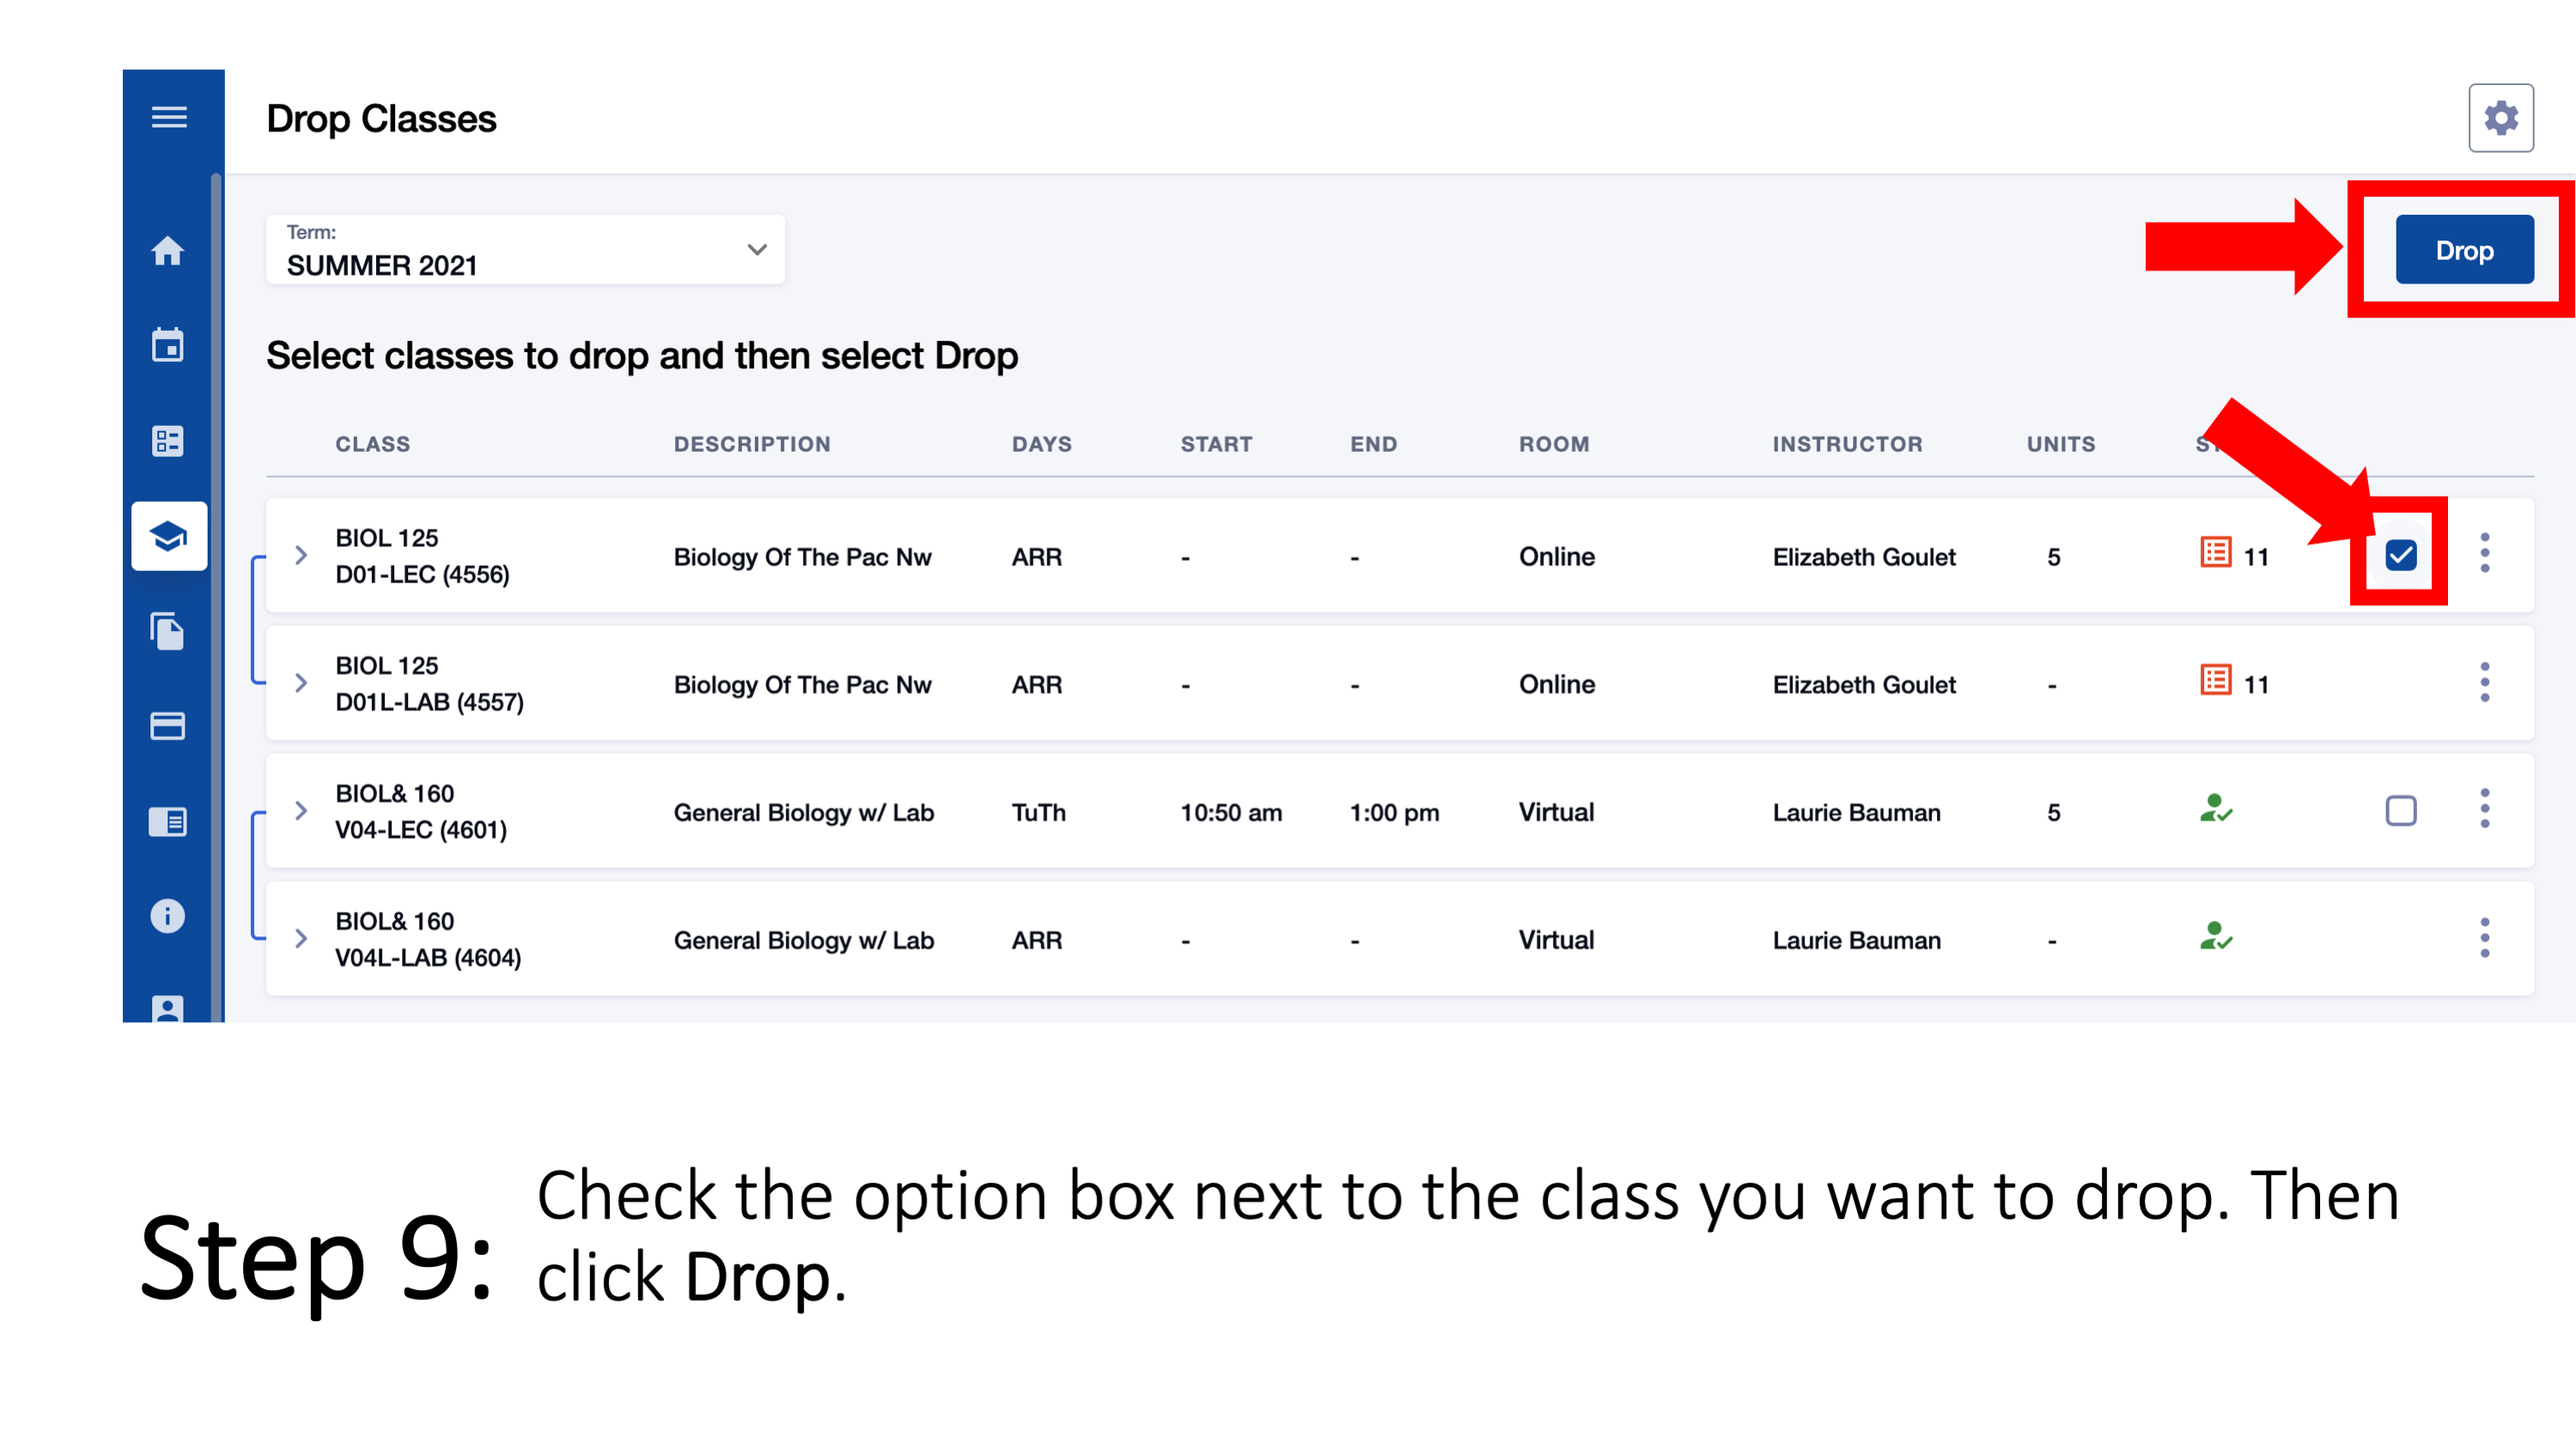 Step 9: Check the option box next to the class you want to drop. Then click Drop.